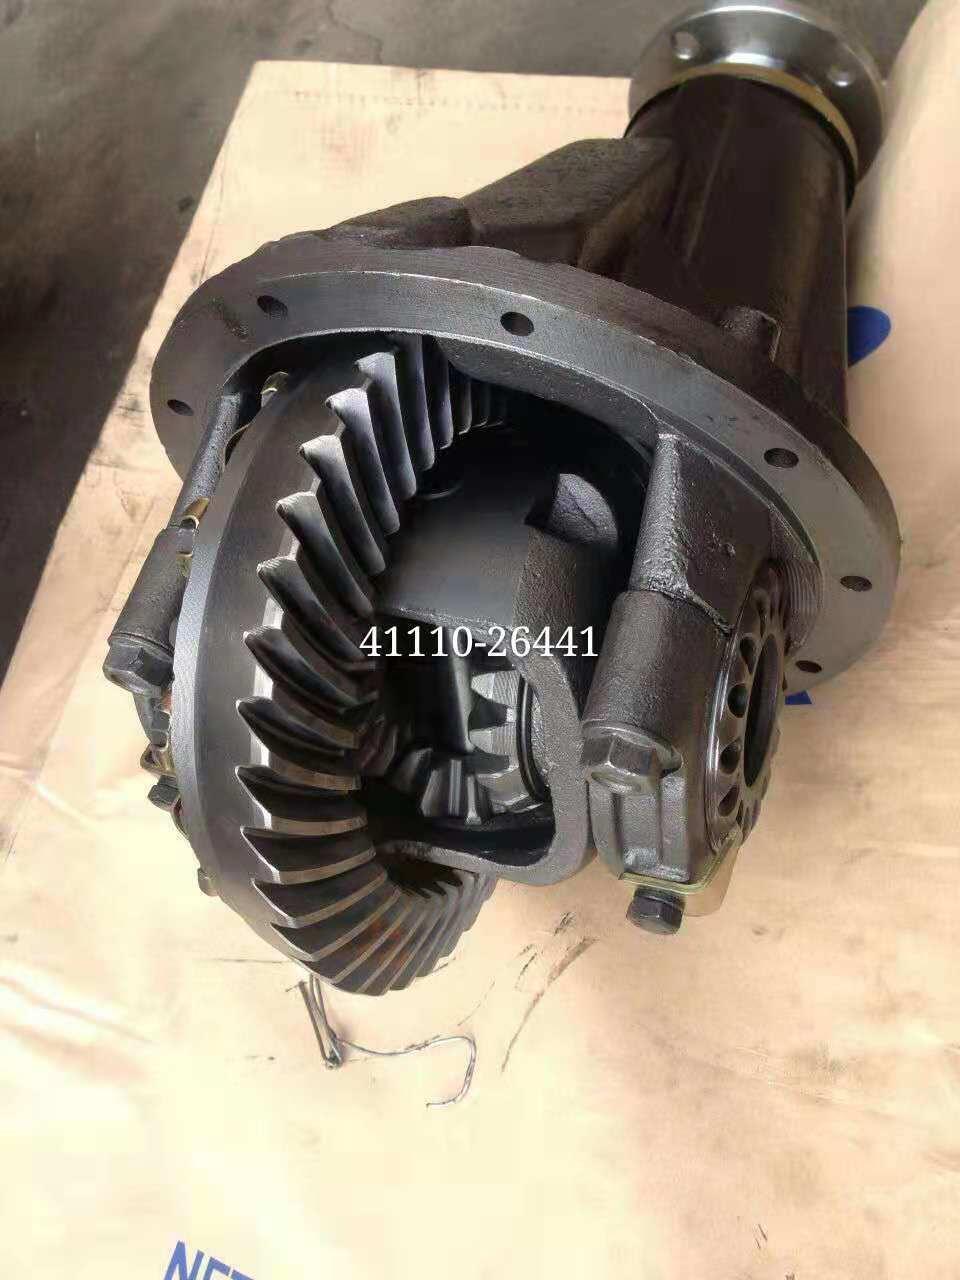 OEM 41110-26051 Differential for Toyota 22r, Hiace Ratio 4.55 (9: 41)